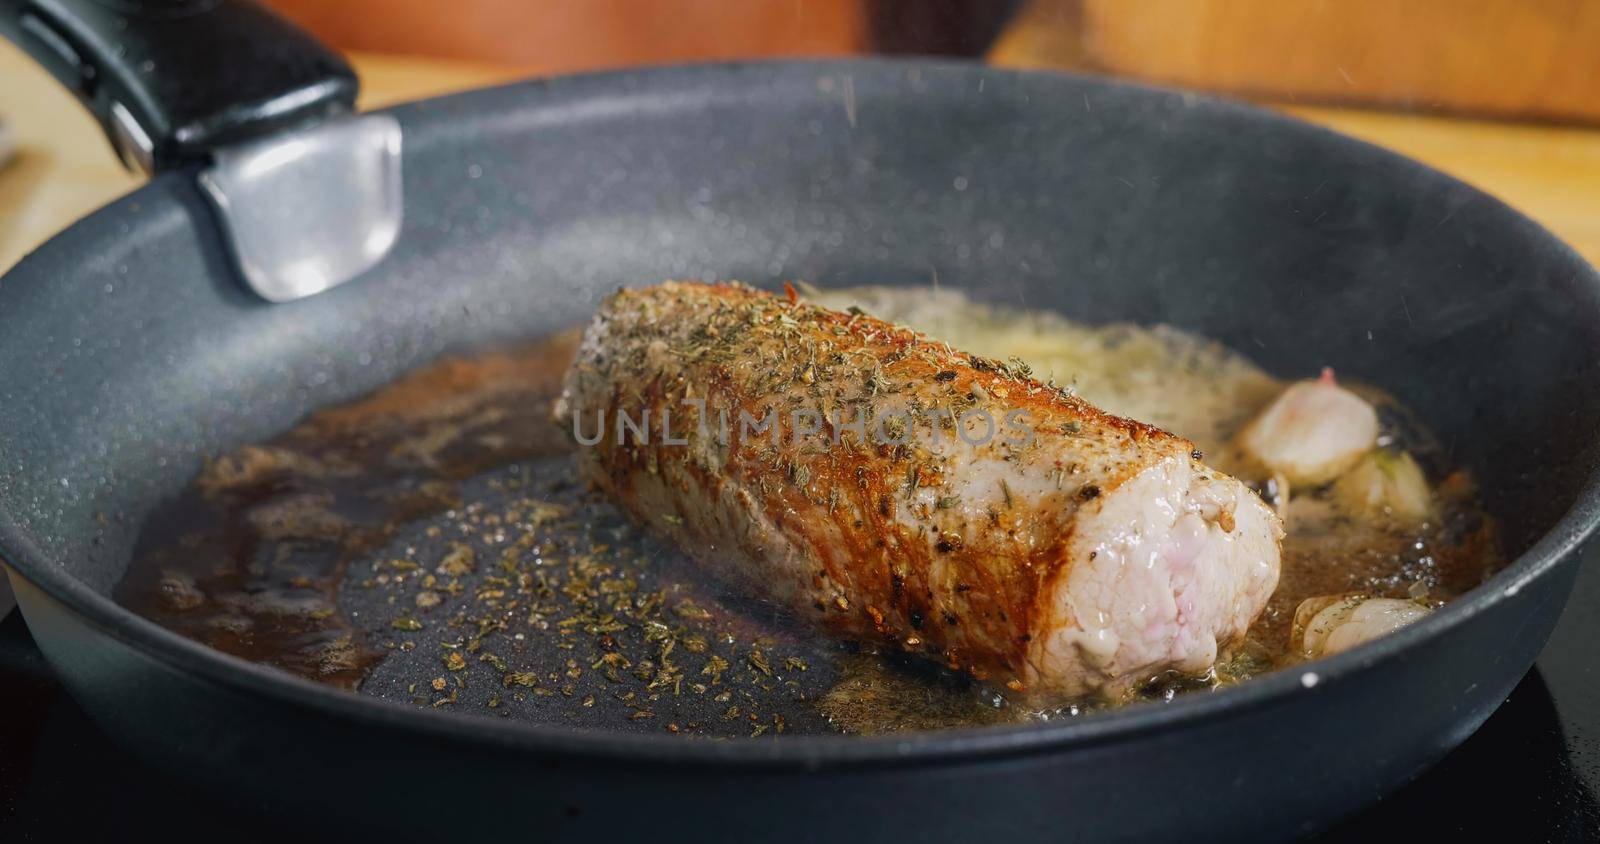 Seasoning with Falling Herbs on Fresh Fried Pork Meat. Professional Cooking. Spectacular images from kitchen.